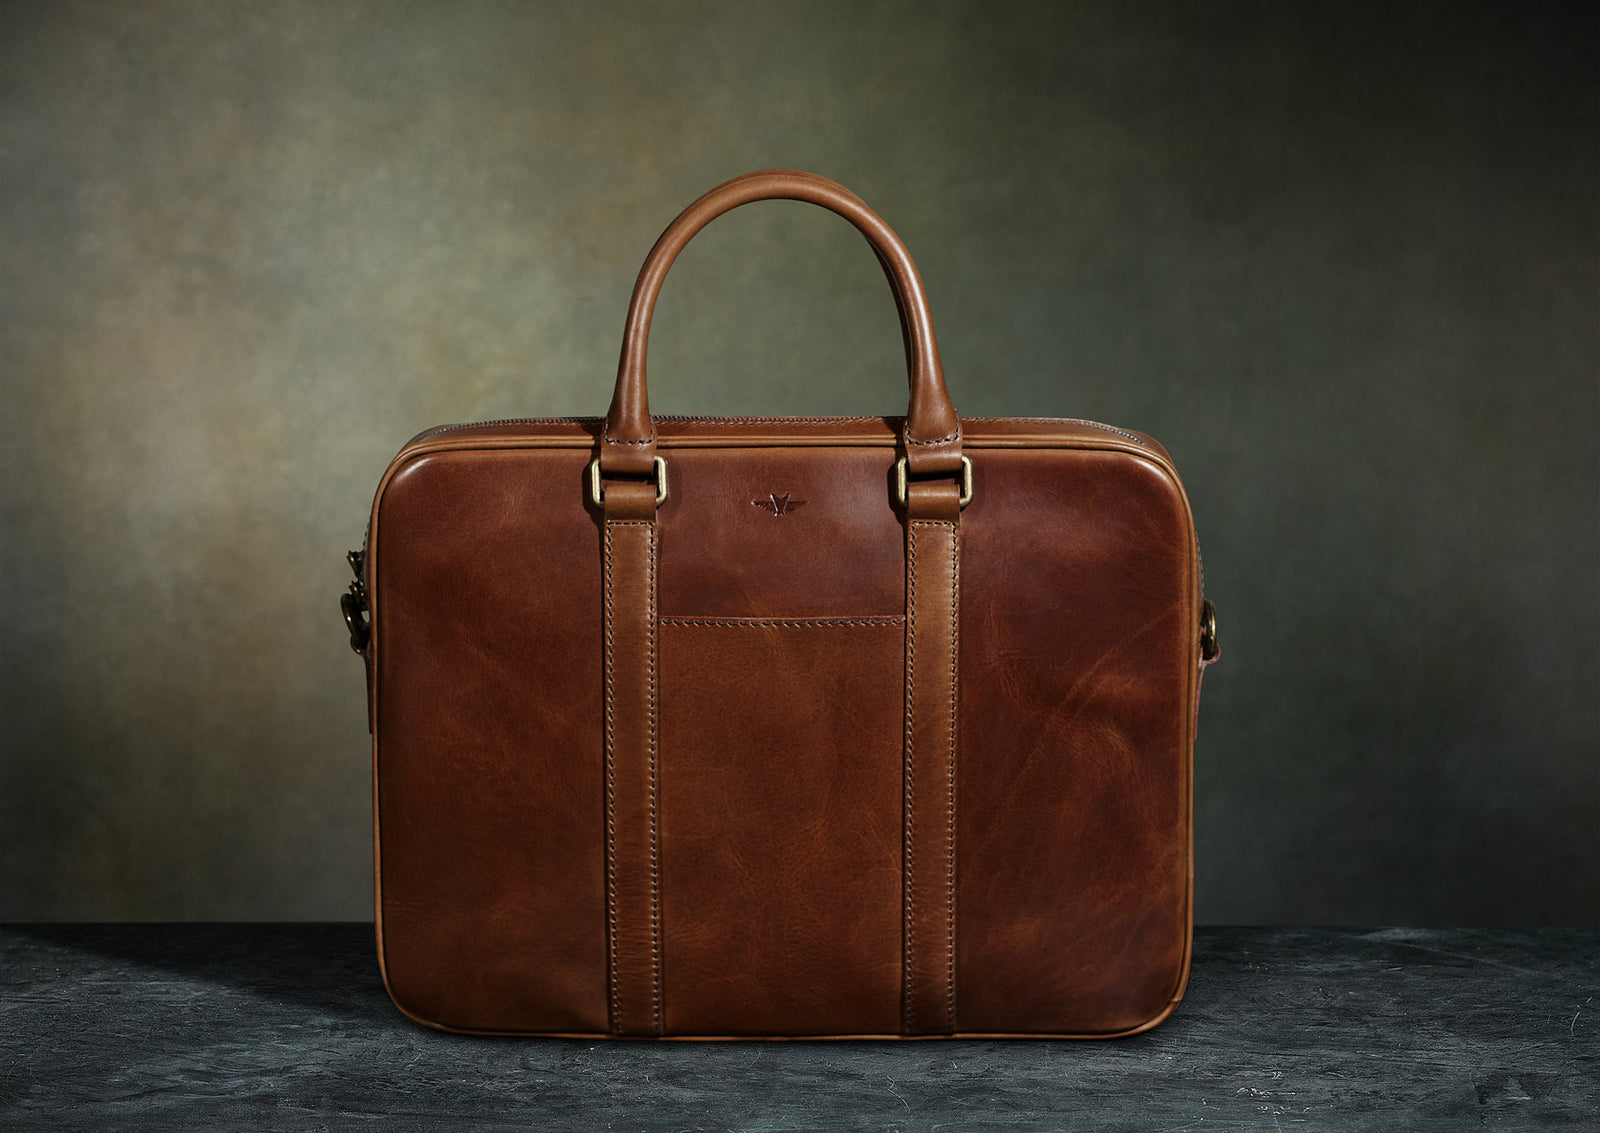 Attache Case vs Briefcase: Which One Suits Your Style?